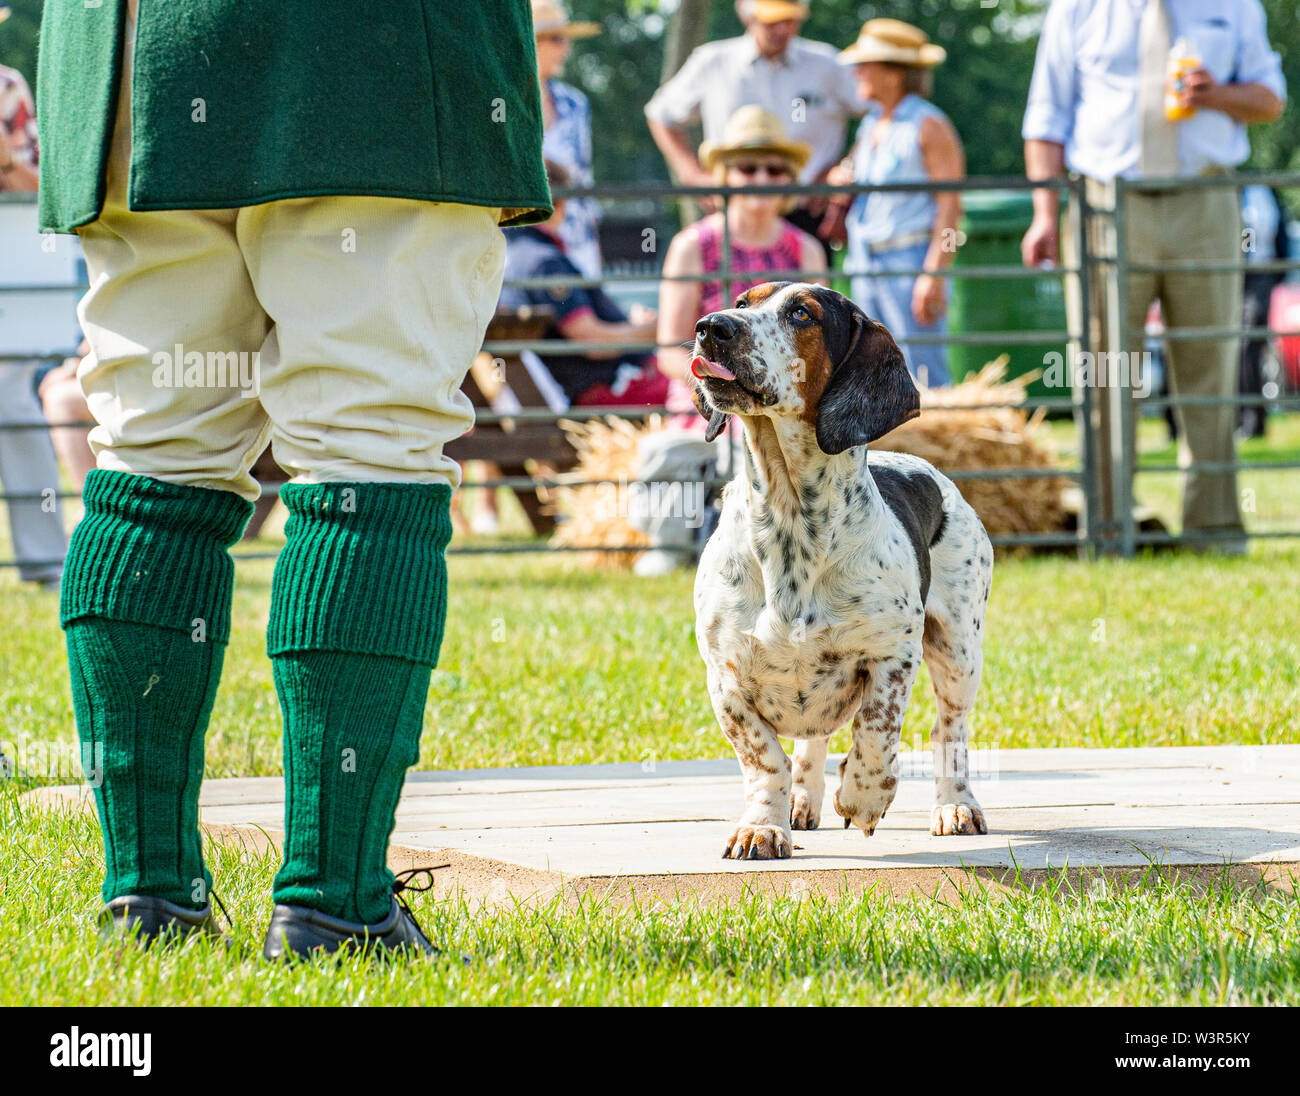 The annual Festival of Hunting is a one-day event boasting the greatest gathering of hounds in the country. Harriers, Beagles, Basset Hounds, Draghounds and Bloodhounds will be competing along with displays of fell hounds, coursing dogs, and the popular Sealey Terriers. Credit: Matt Limb OBE/Alamy Live News Stock Photo